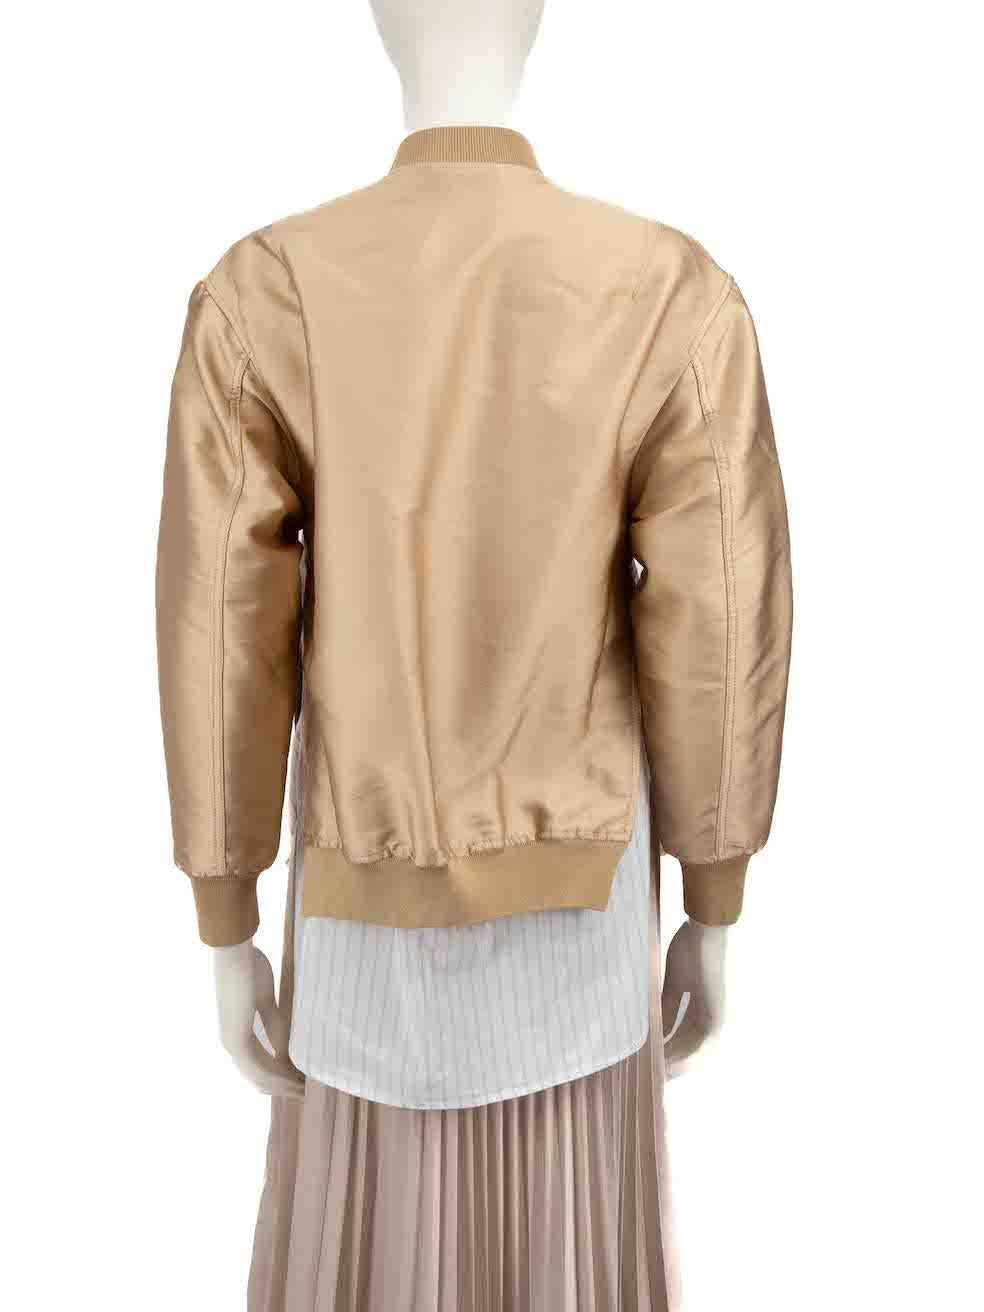 3.1 Phillip Lim Beige Bi-Layer Bomber Jacket Size XXS In Excellent Condition For Sale In London, GB